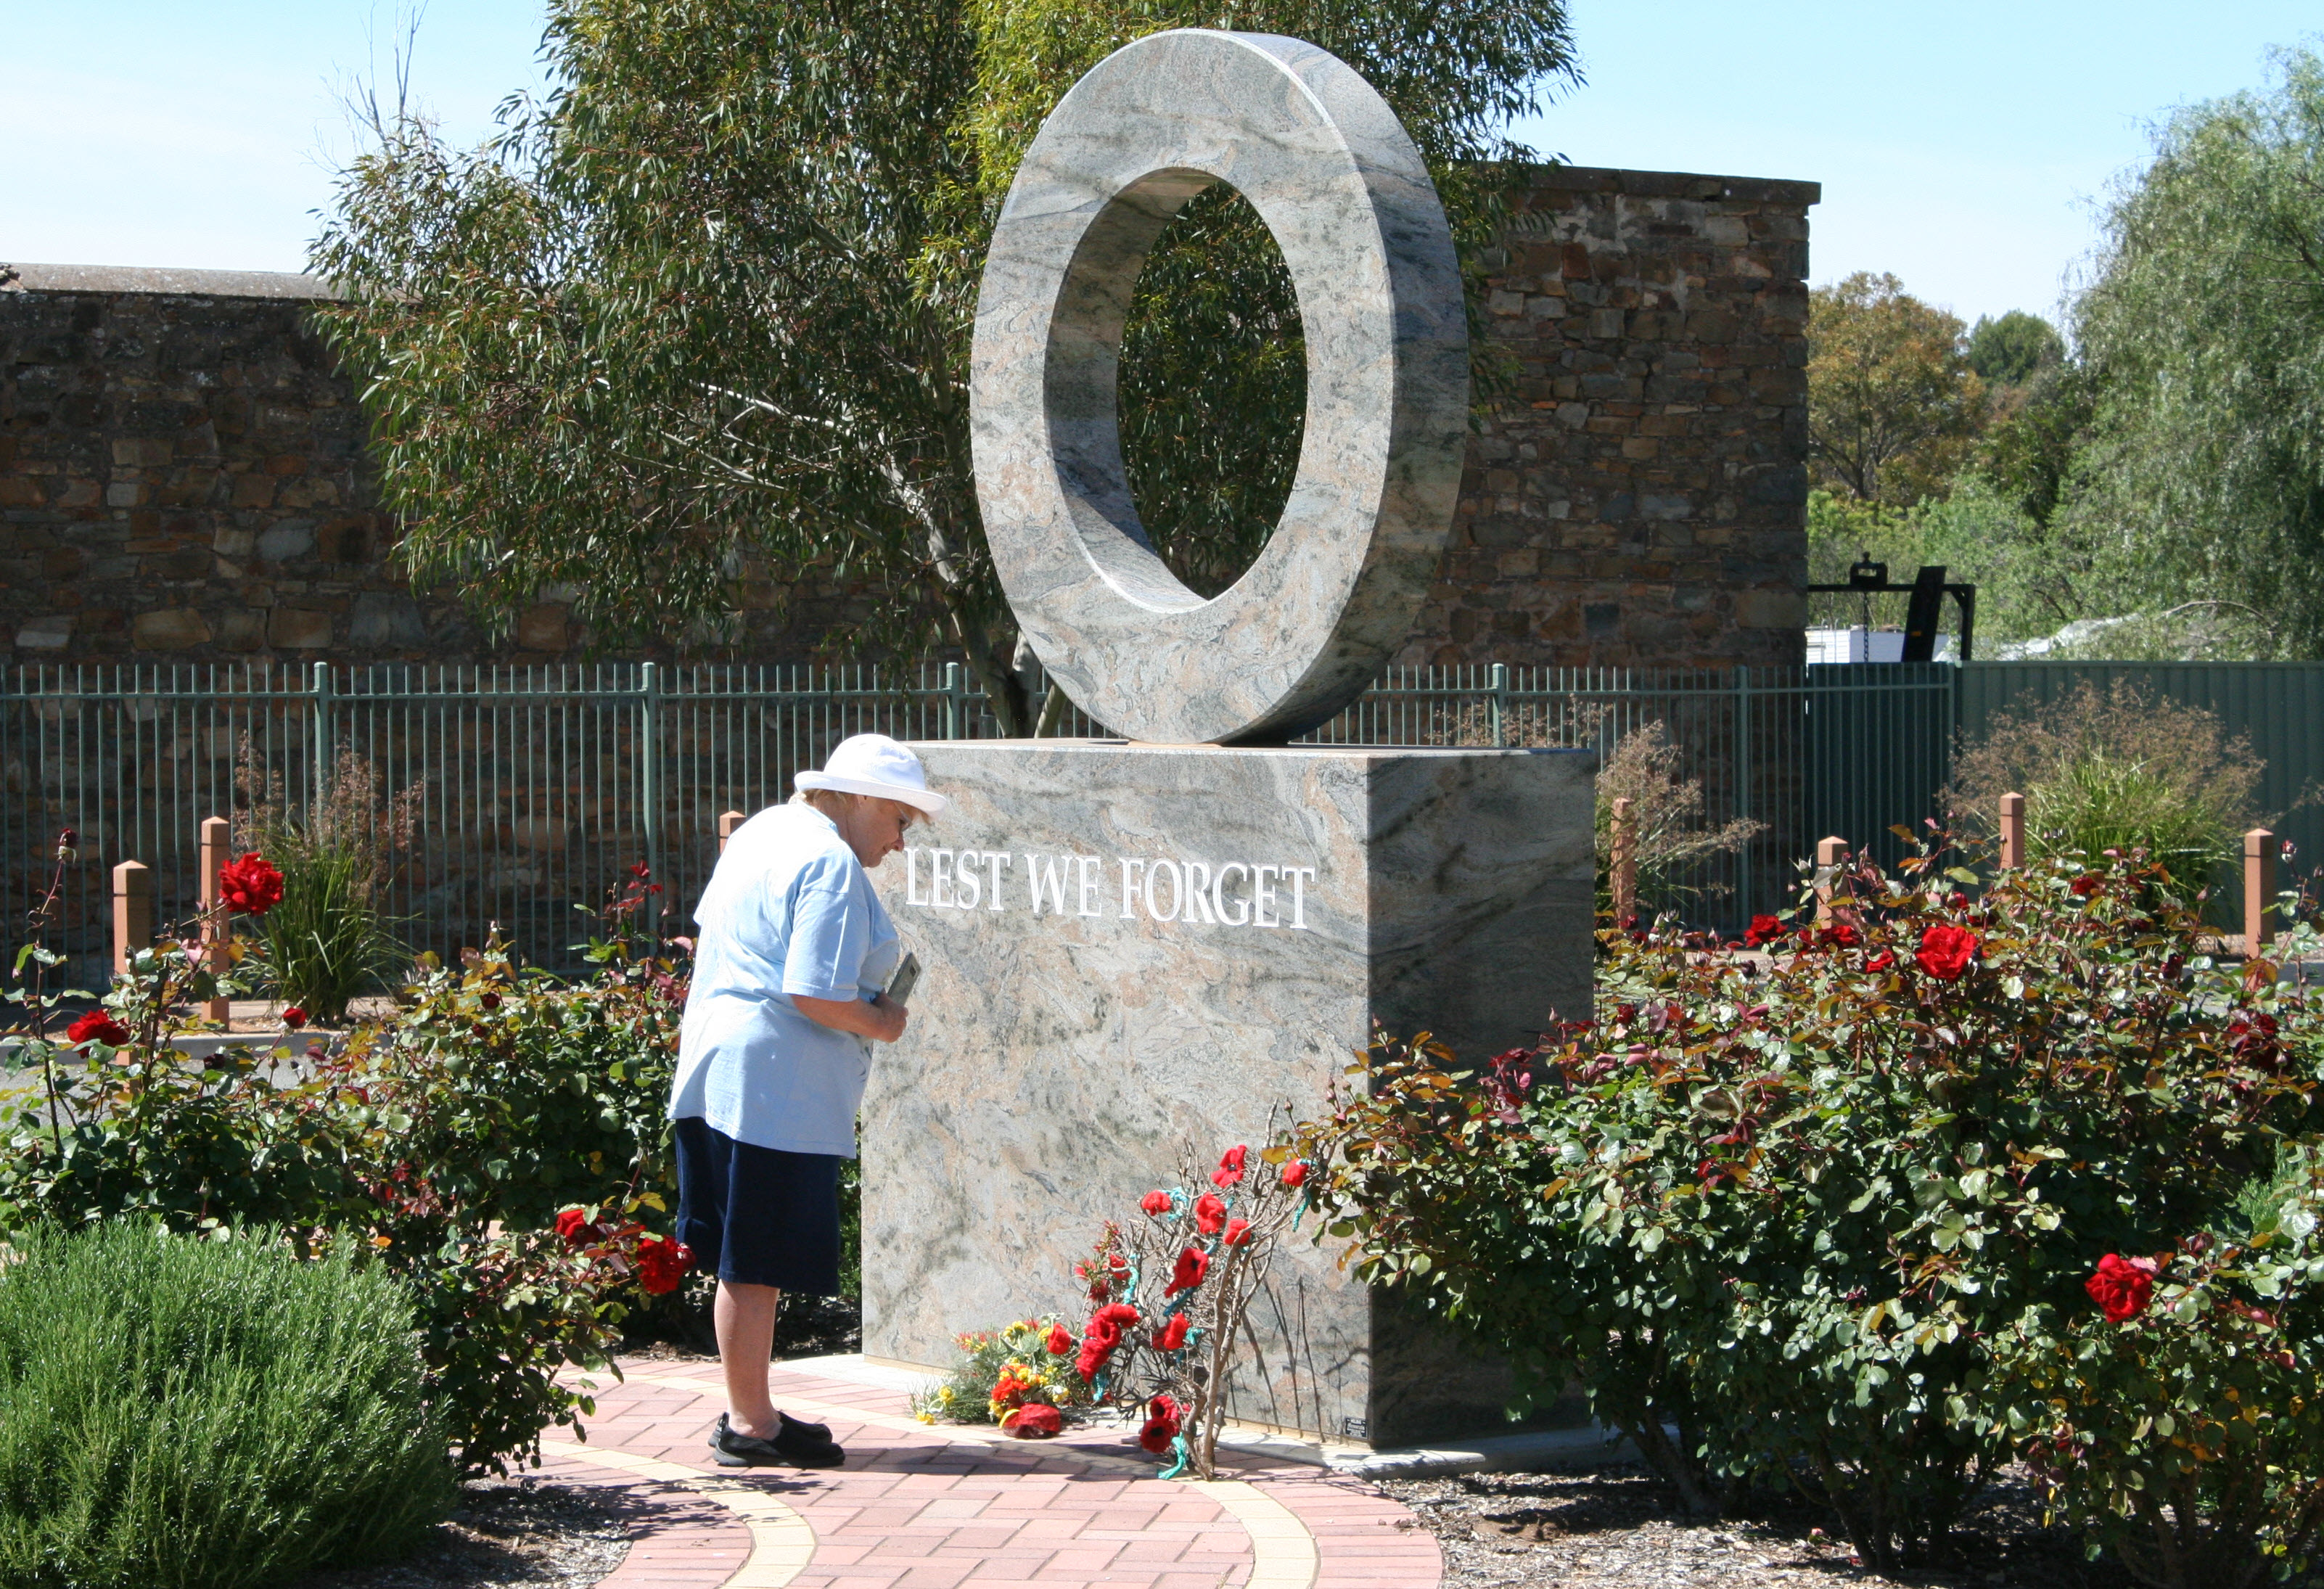 A visitor observing the wreaths.